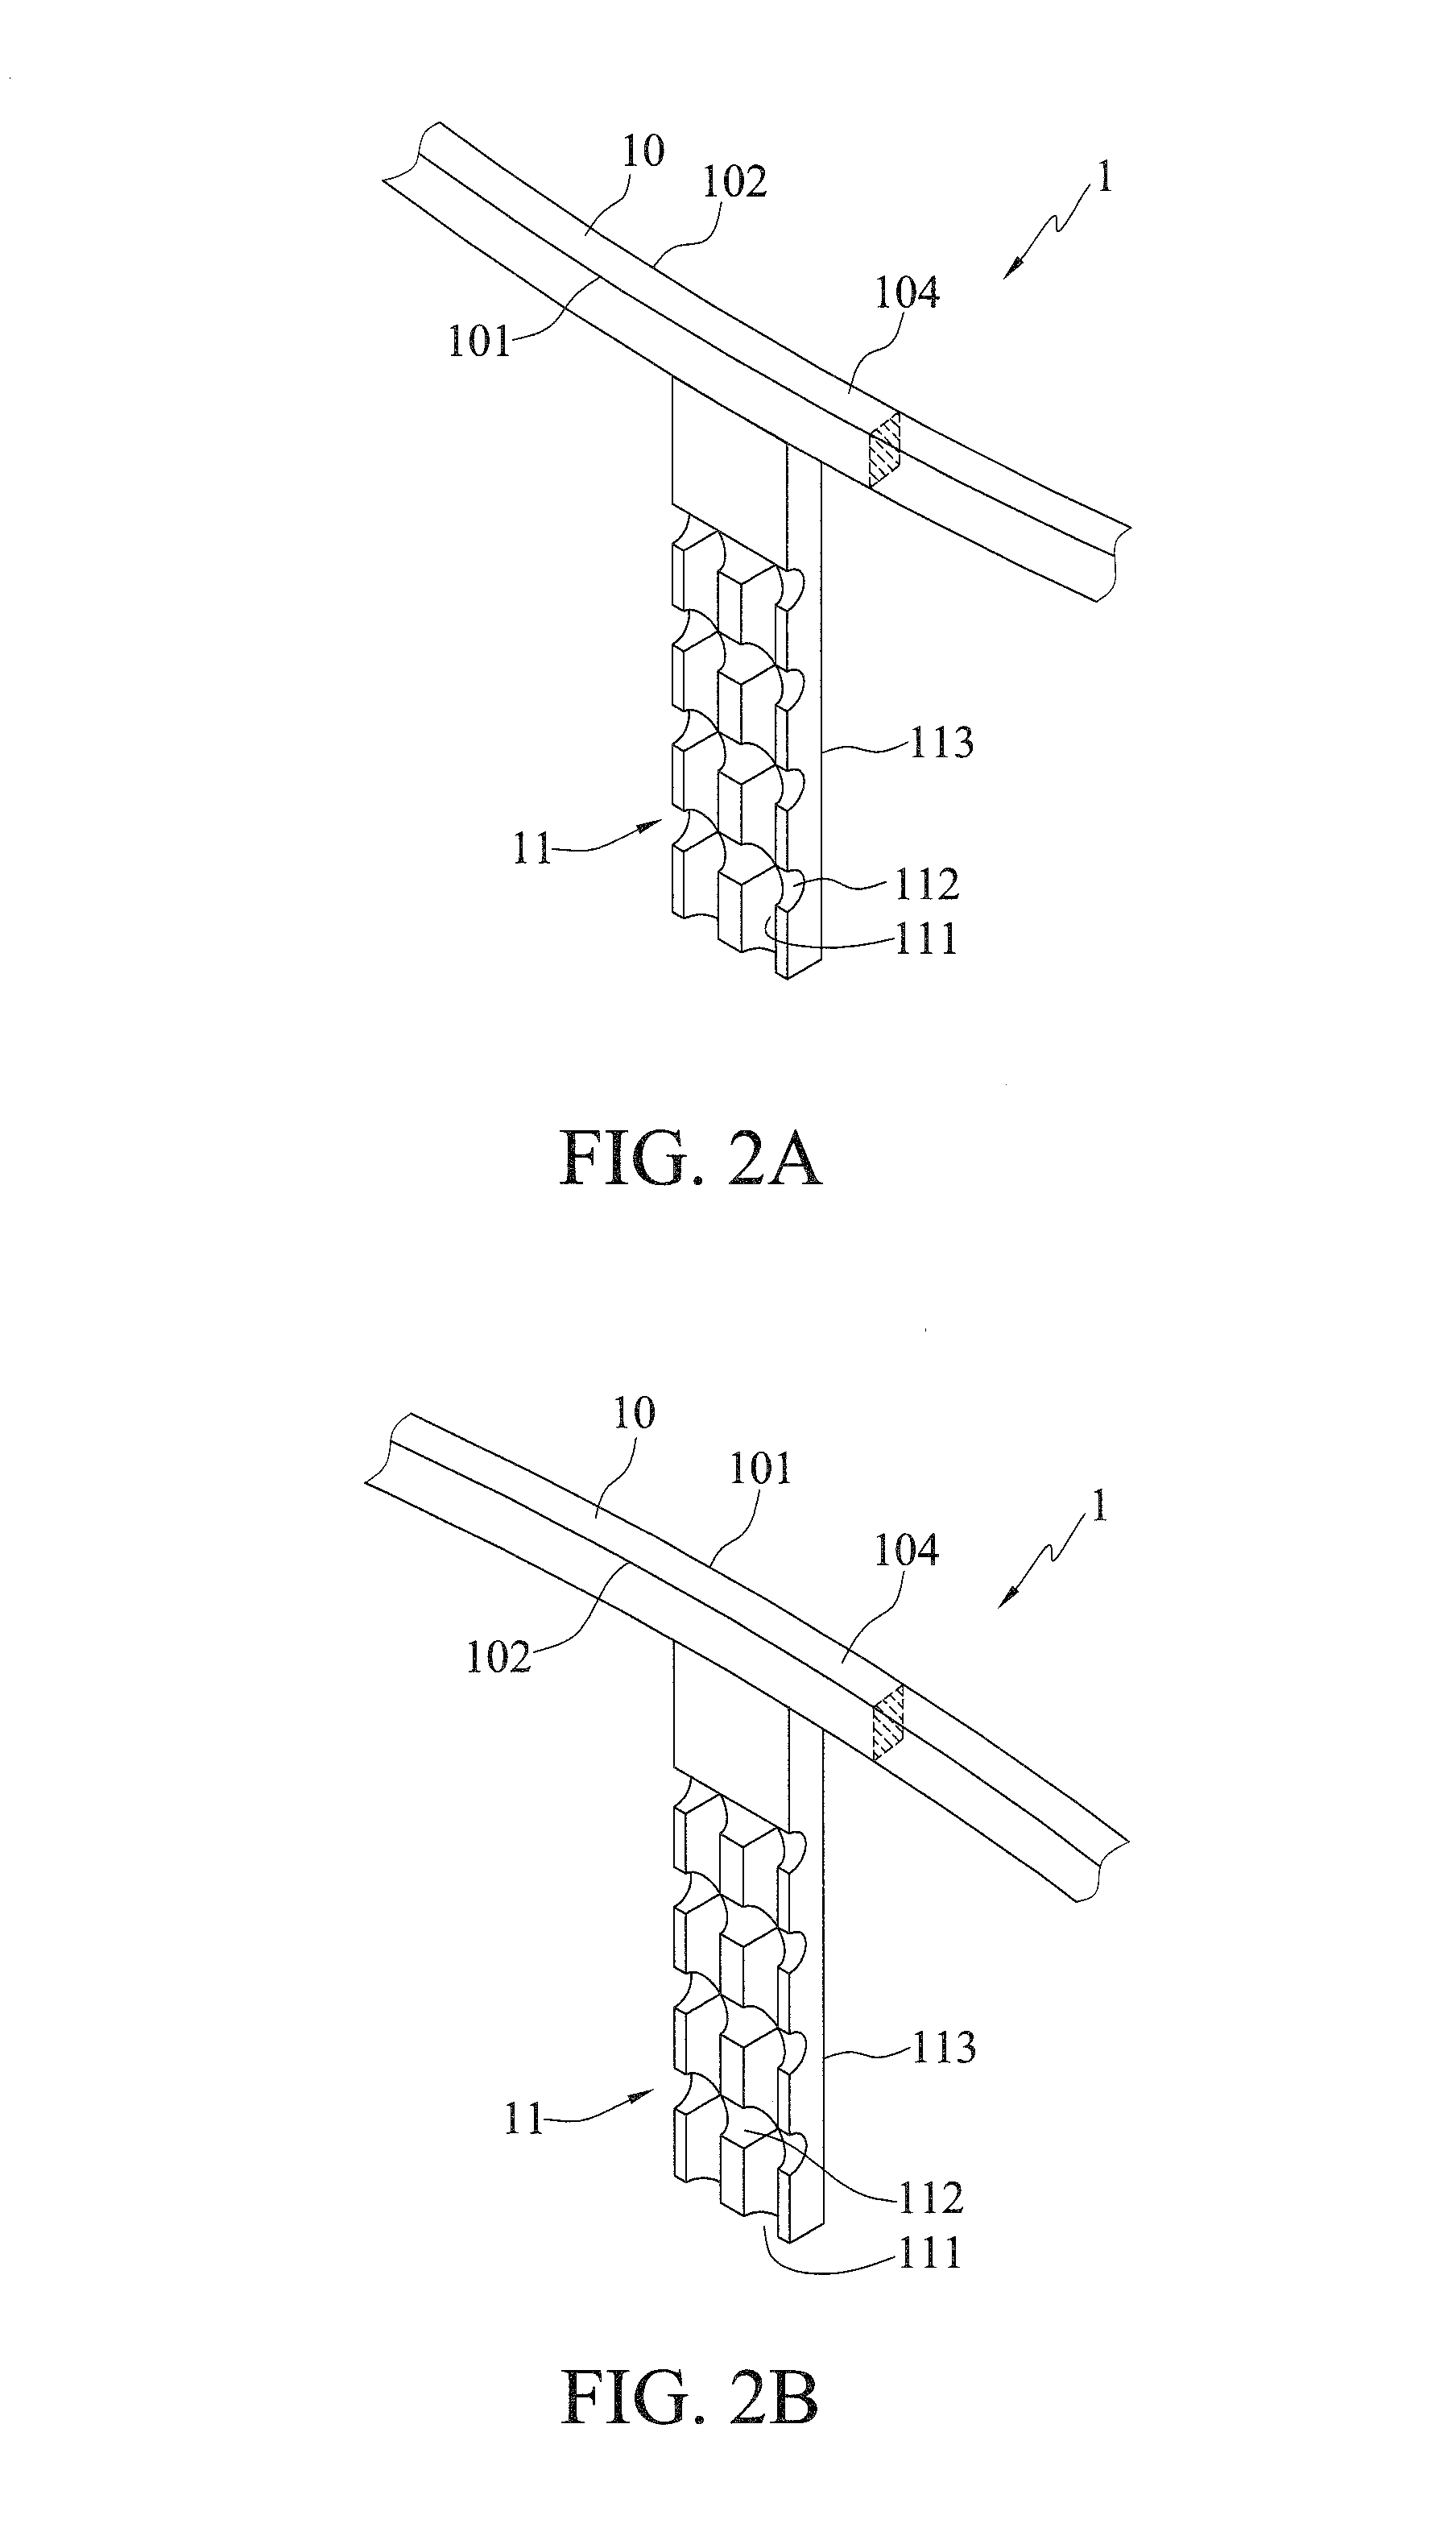 Power collection device for electric machine